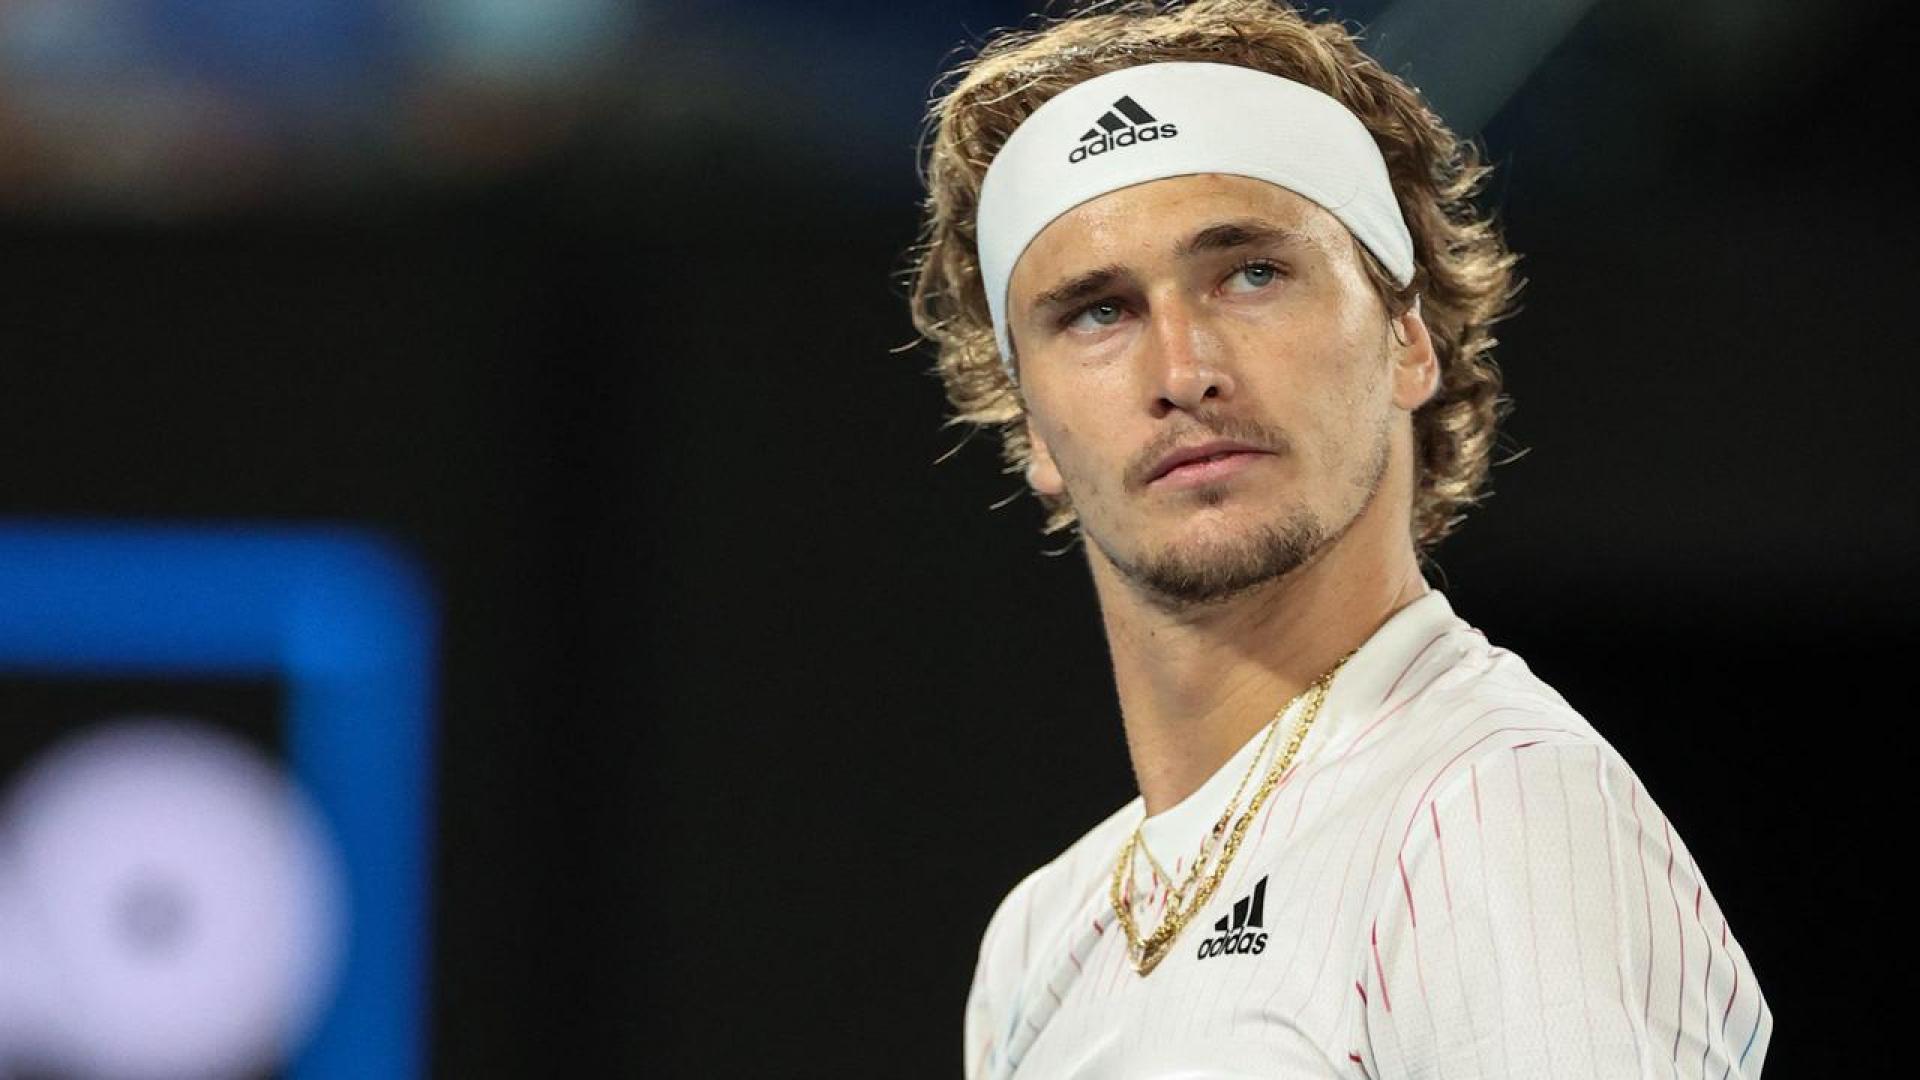 alexander zverev reveals why his game and results took hit in 2022